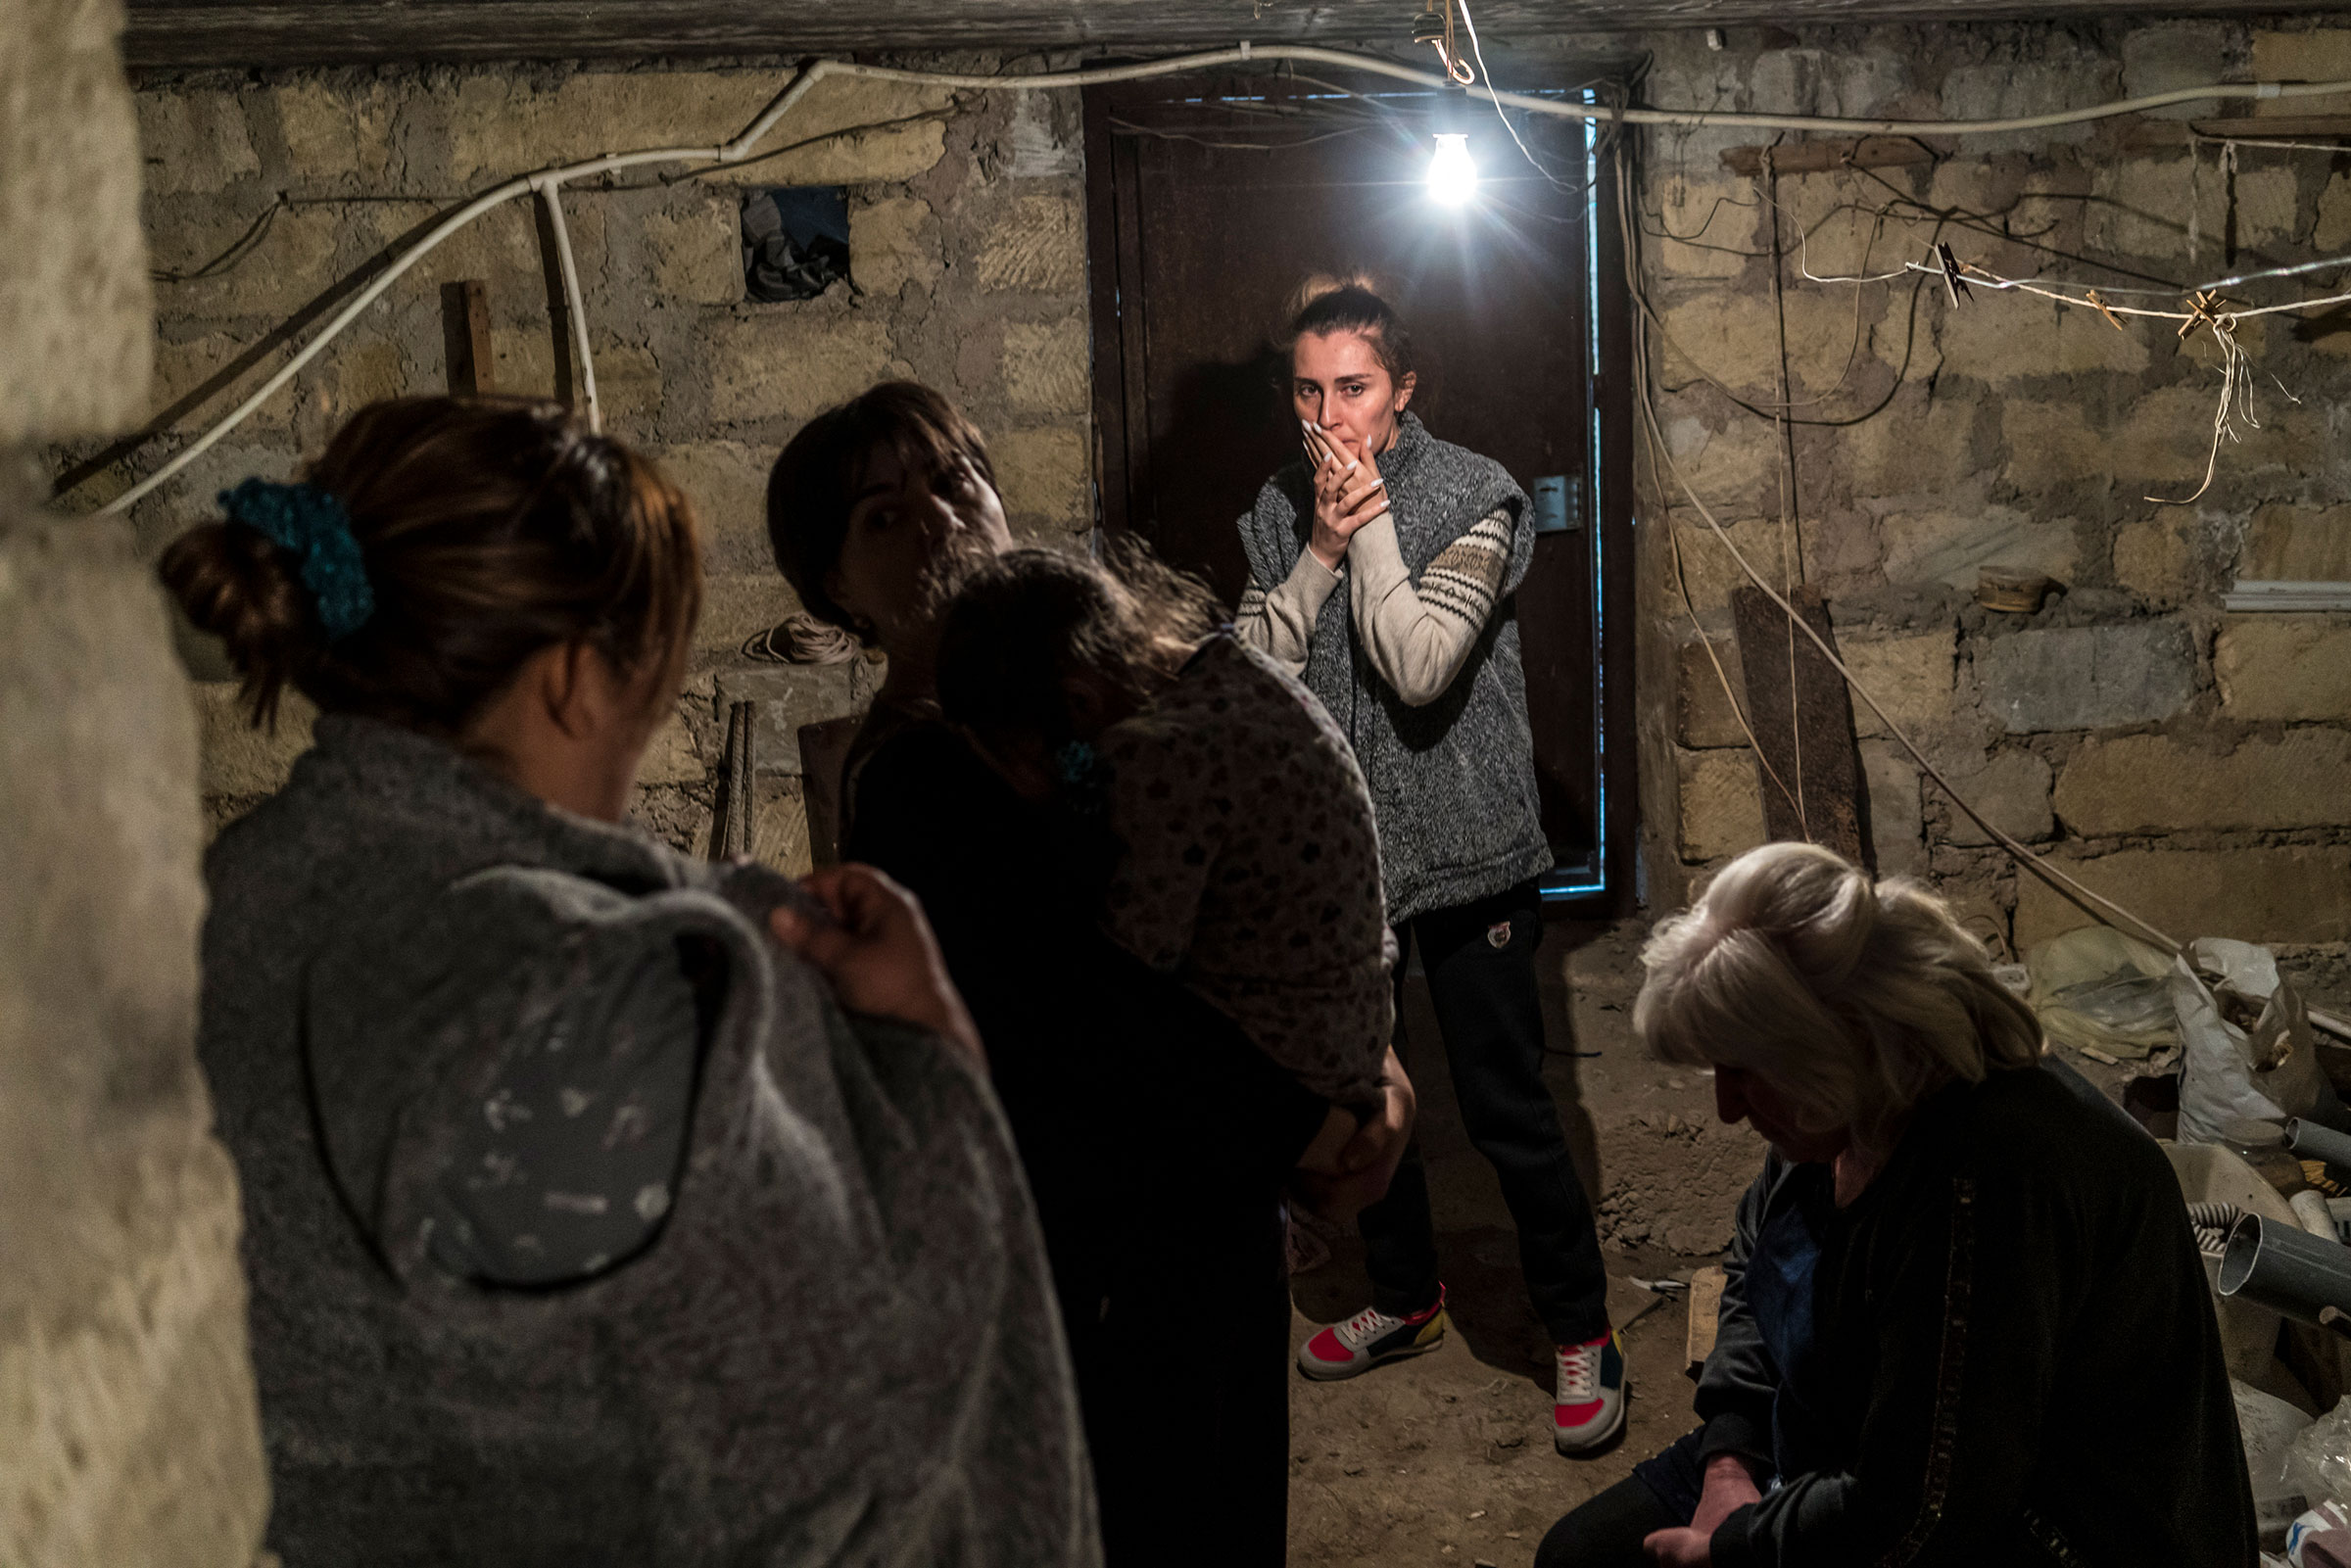 Residents shelter in a basement as air raid sirens sound on Sept. 29, 2020 in Stepanakert, Nagorno-Karabakh. (Brendan Hoffman—Getty Images)